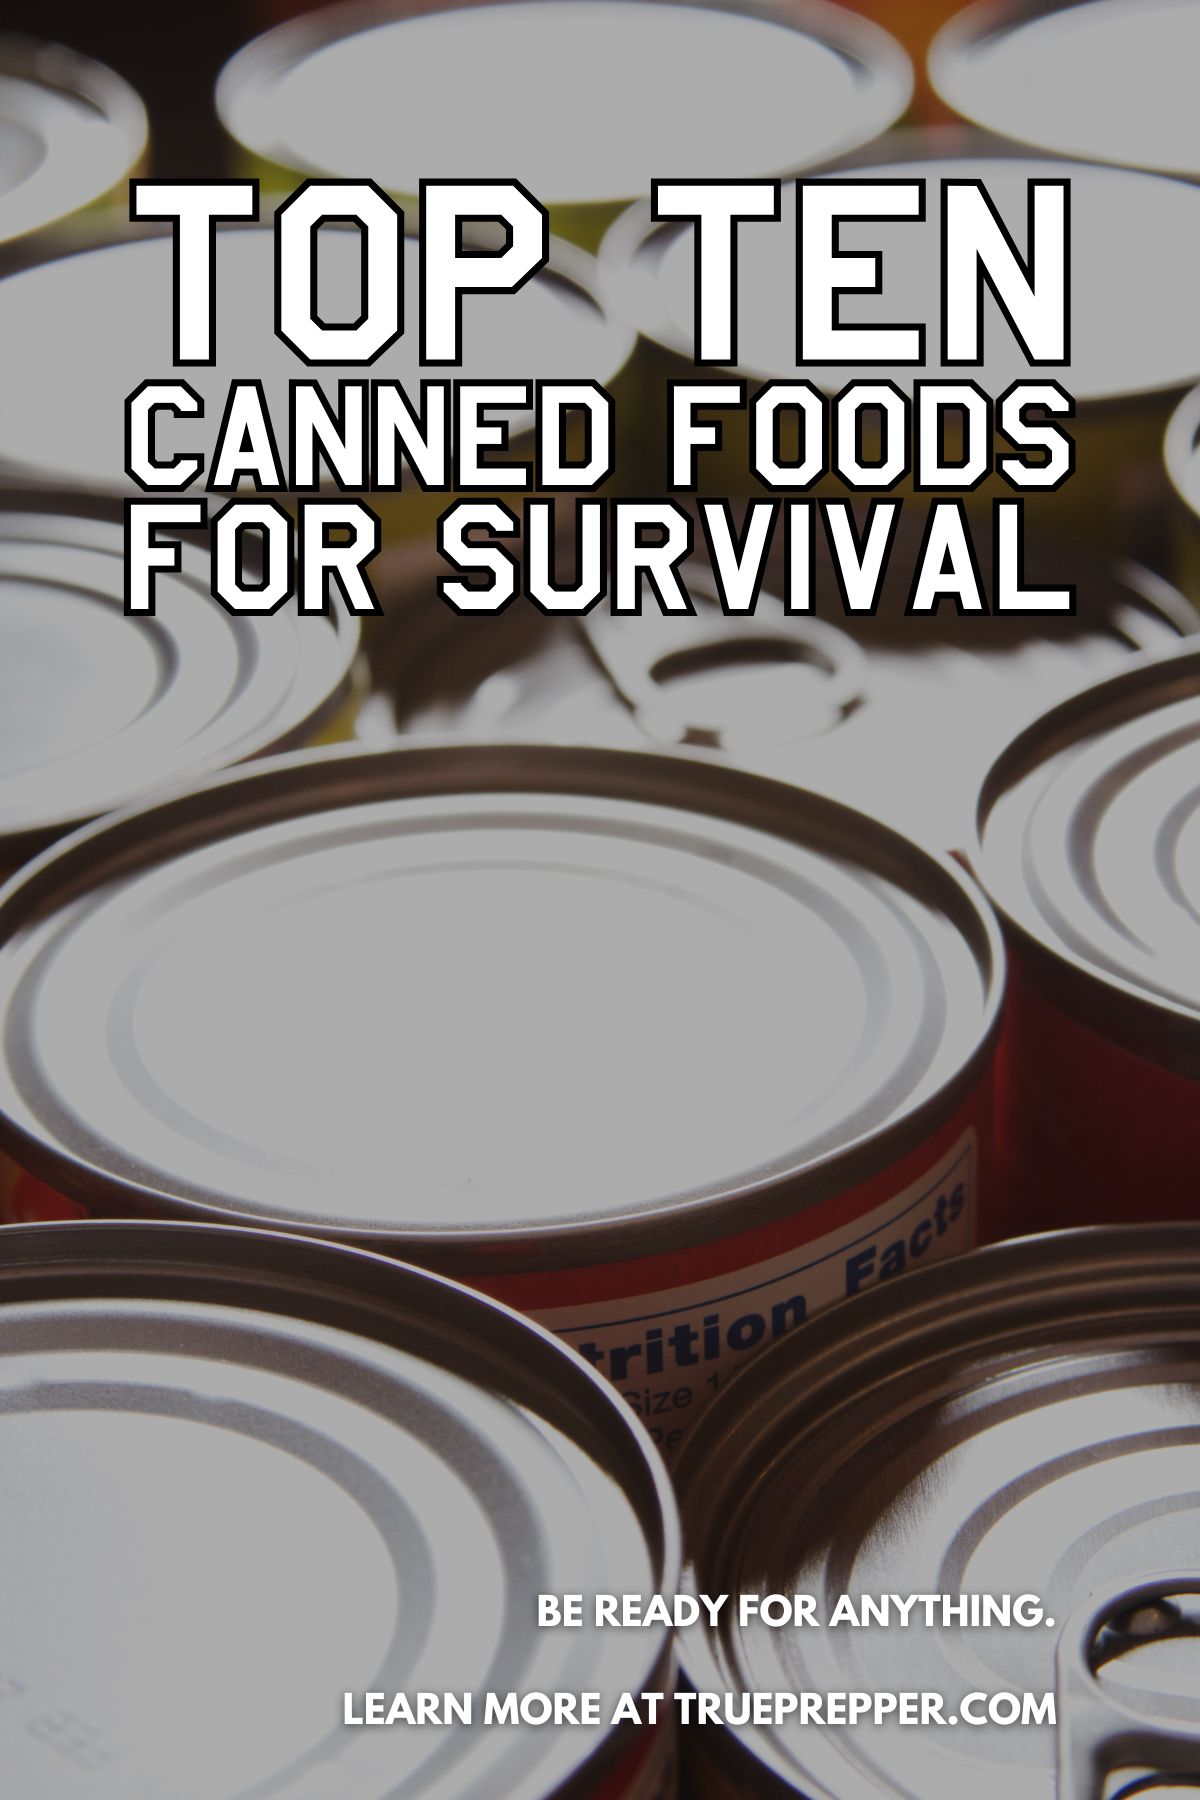 Top 10 Canned Foods for Survival